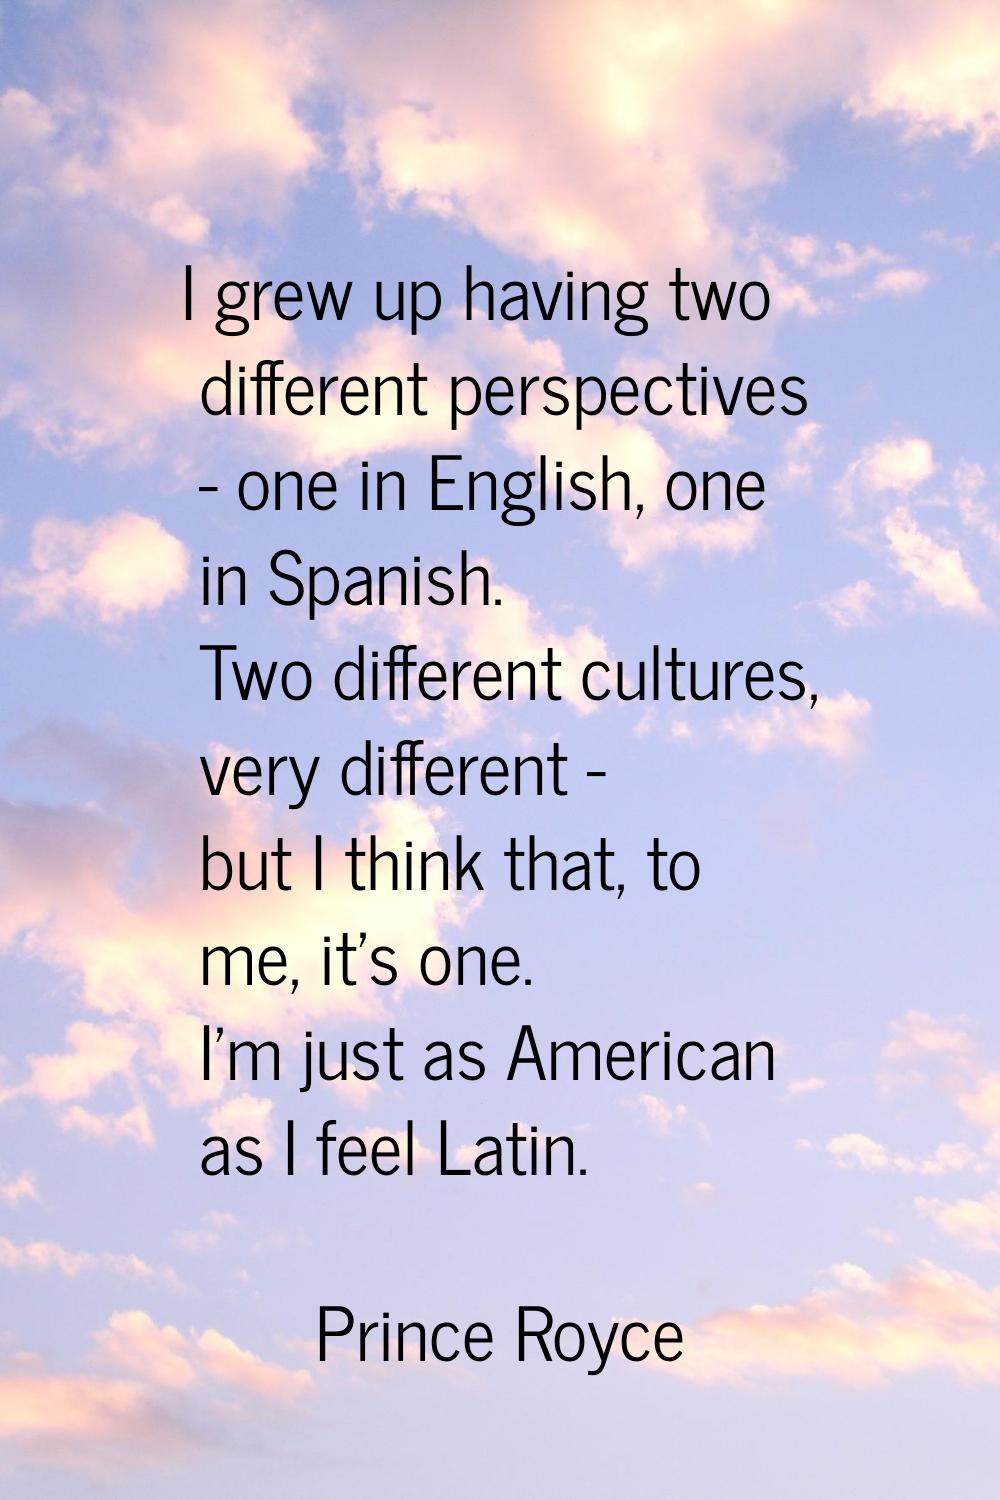 I grew up having two different perspectives - one in English, one in Spanish. Two different culture